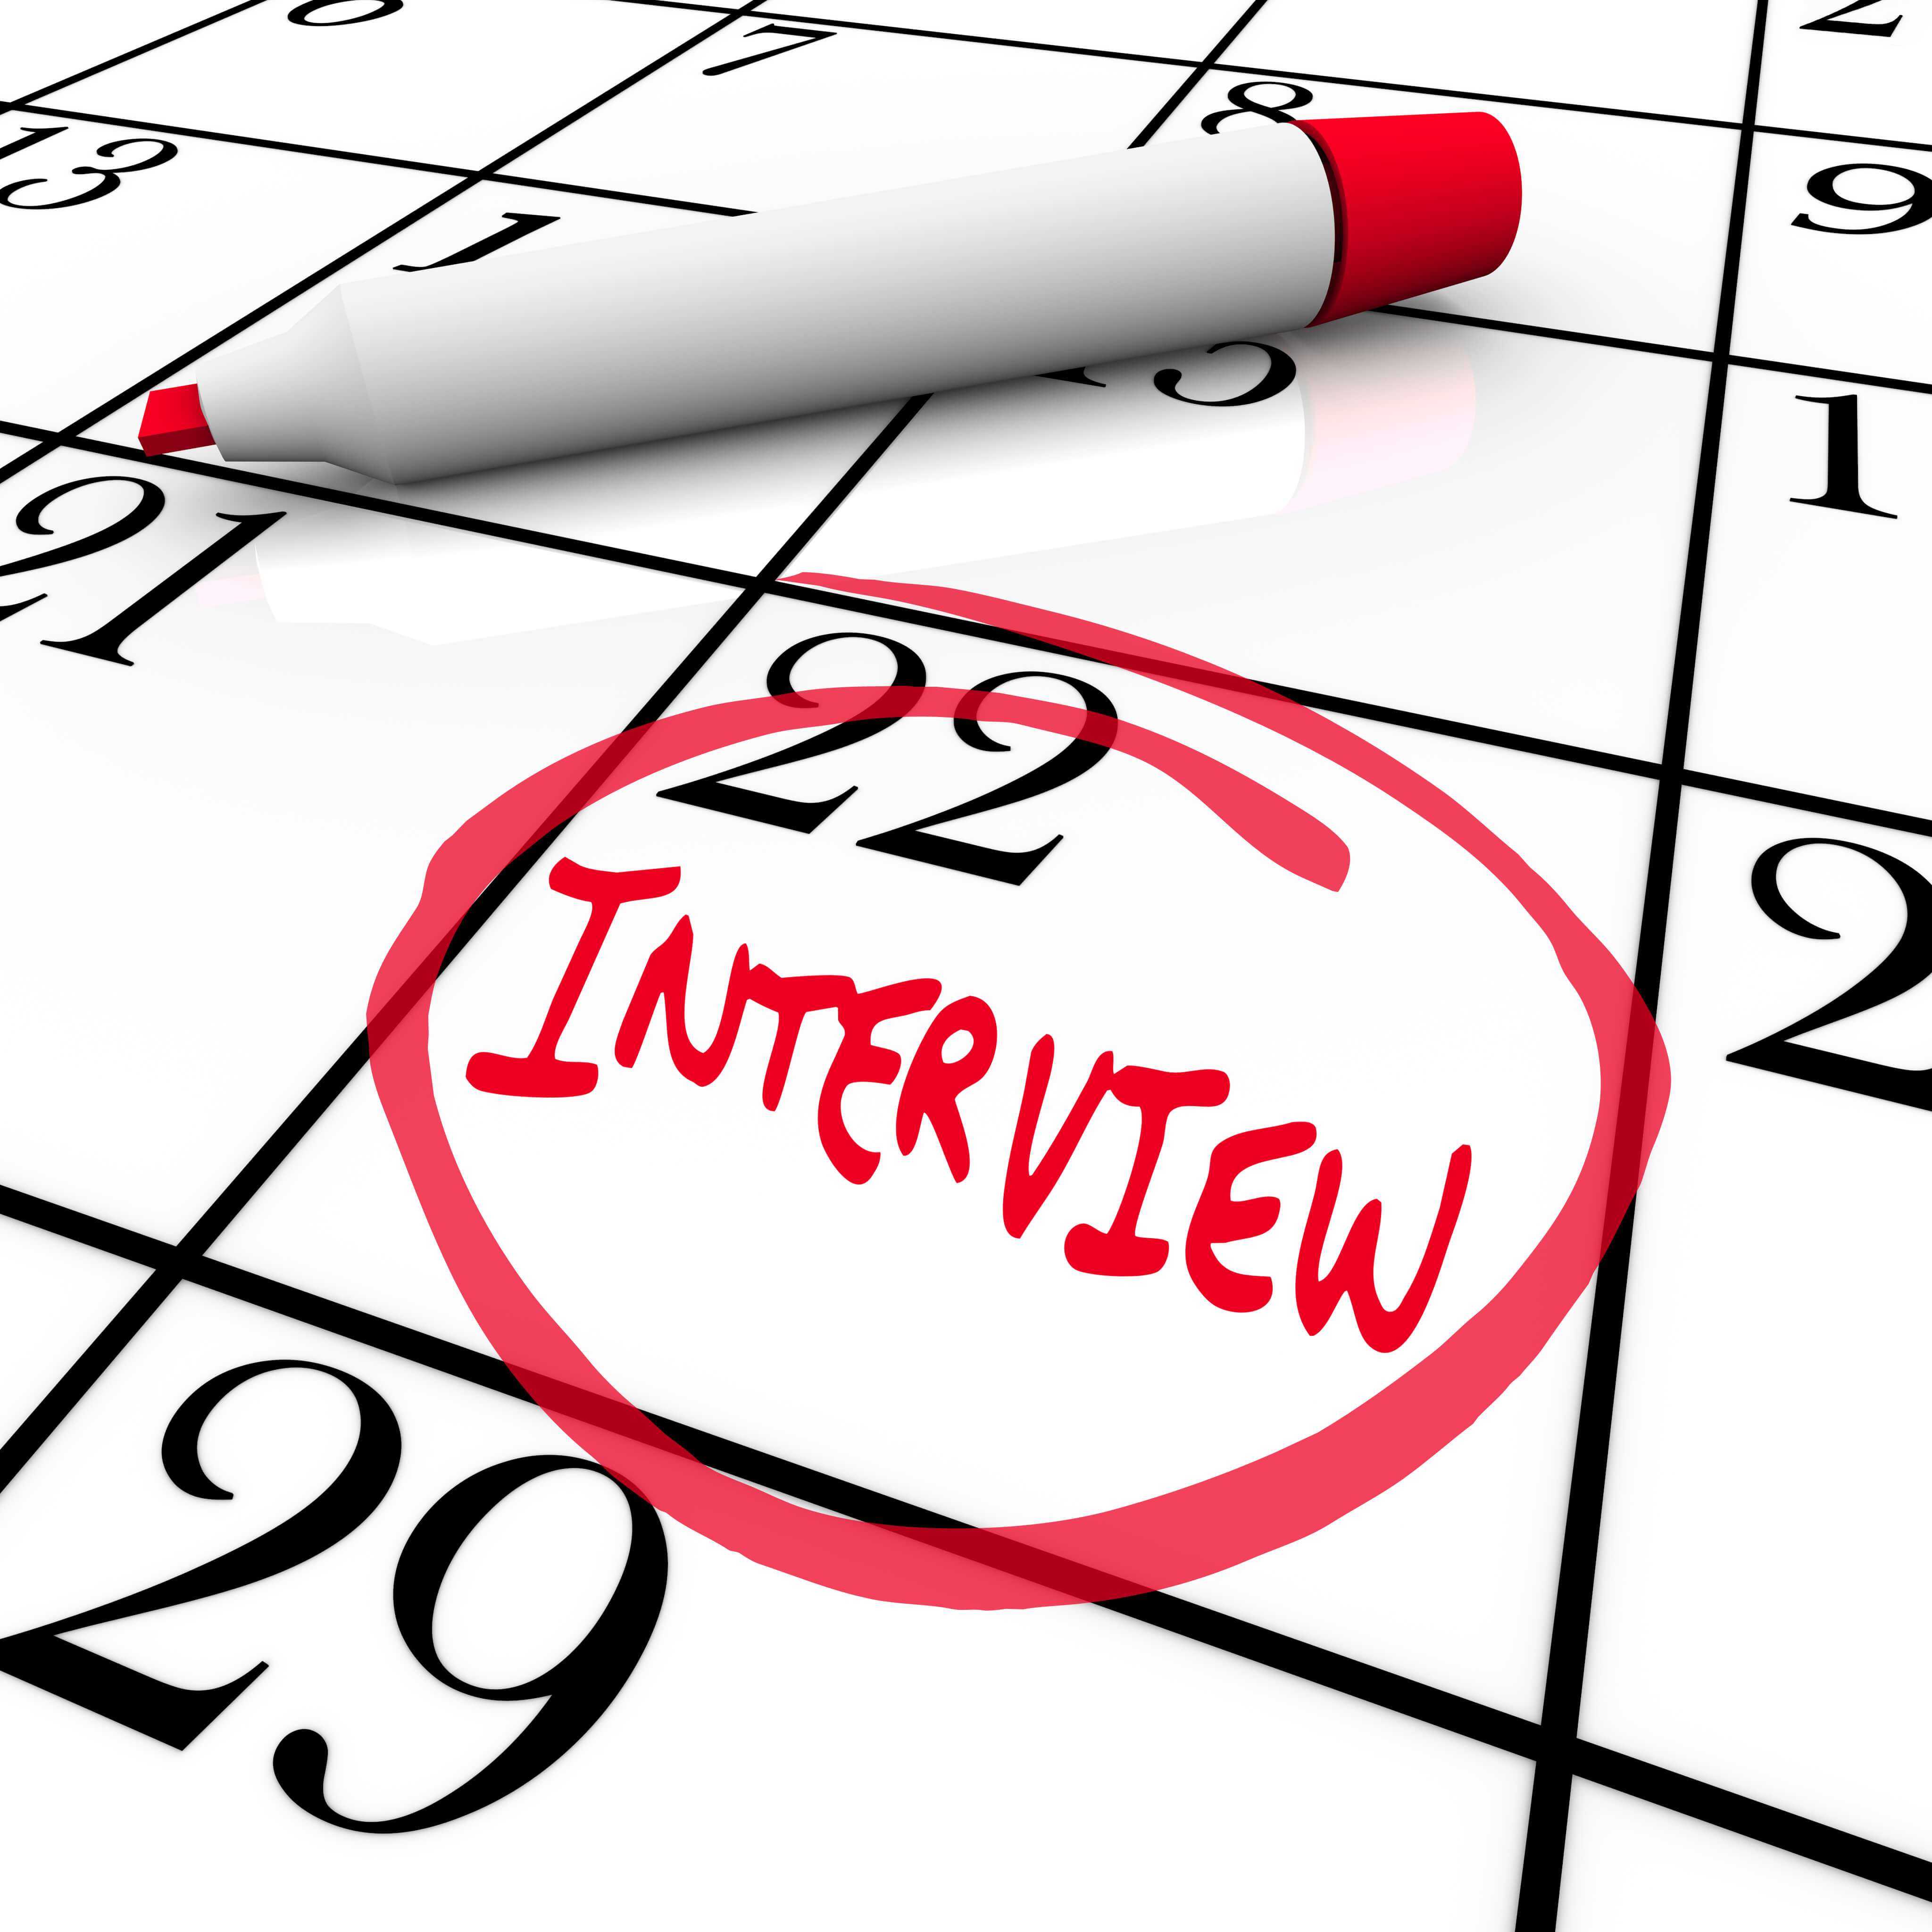 interview skills, career coach, job search